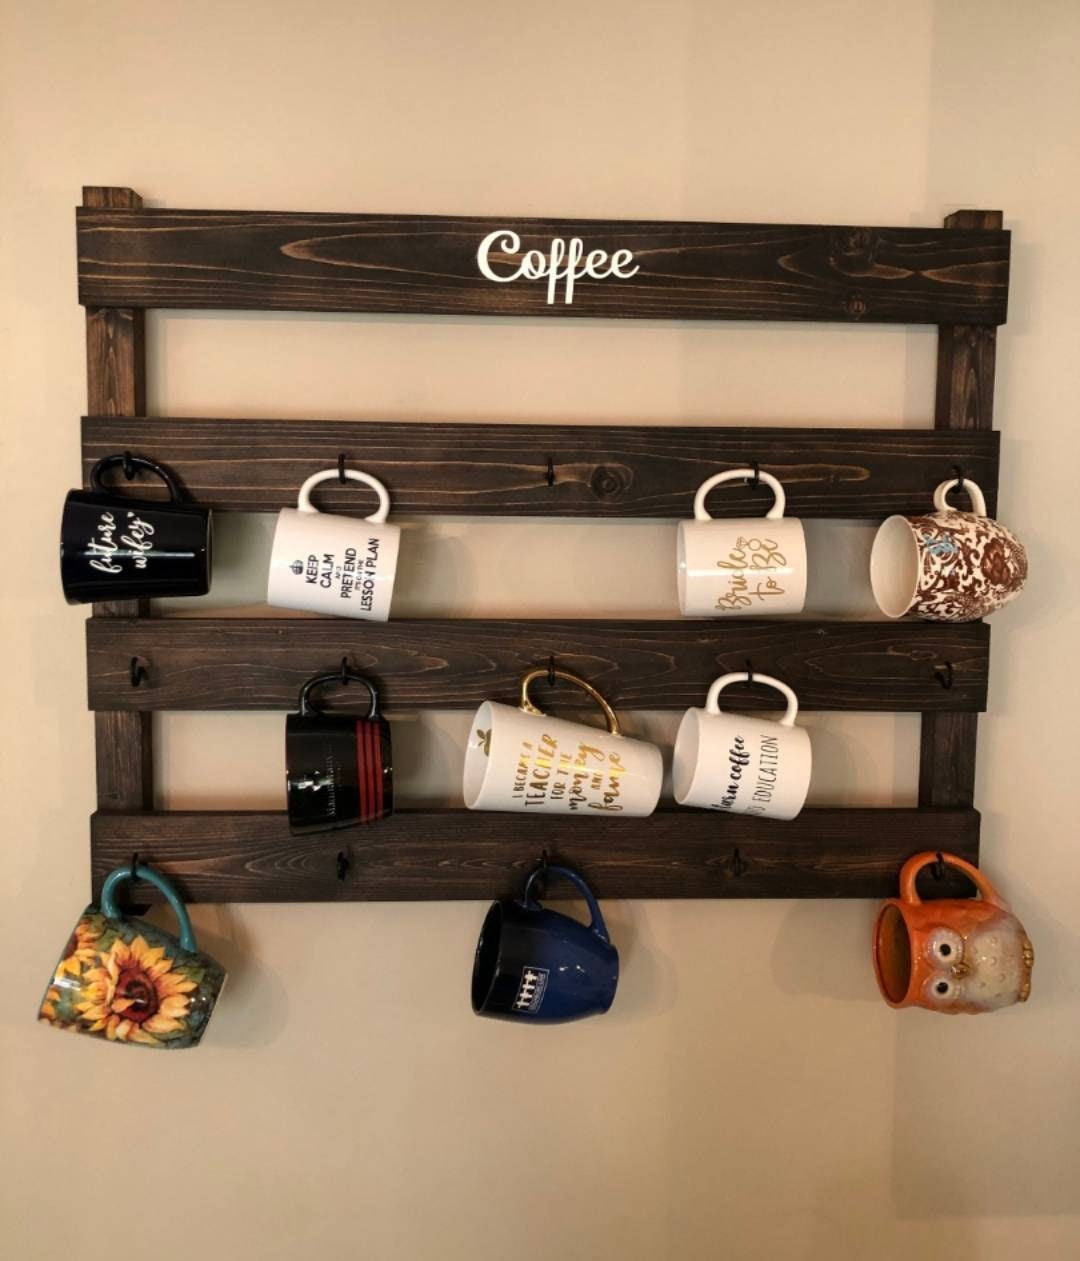 J JACKCUBE DESIGN Coffee Mug Holder Wall Mounted Rustic Wood Cup Organizer  with 16-Hooks Hanging Rack for Home, Kitchen Display Storage and Collection  : MK519A